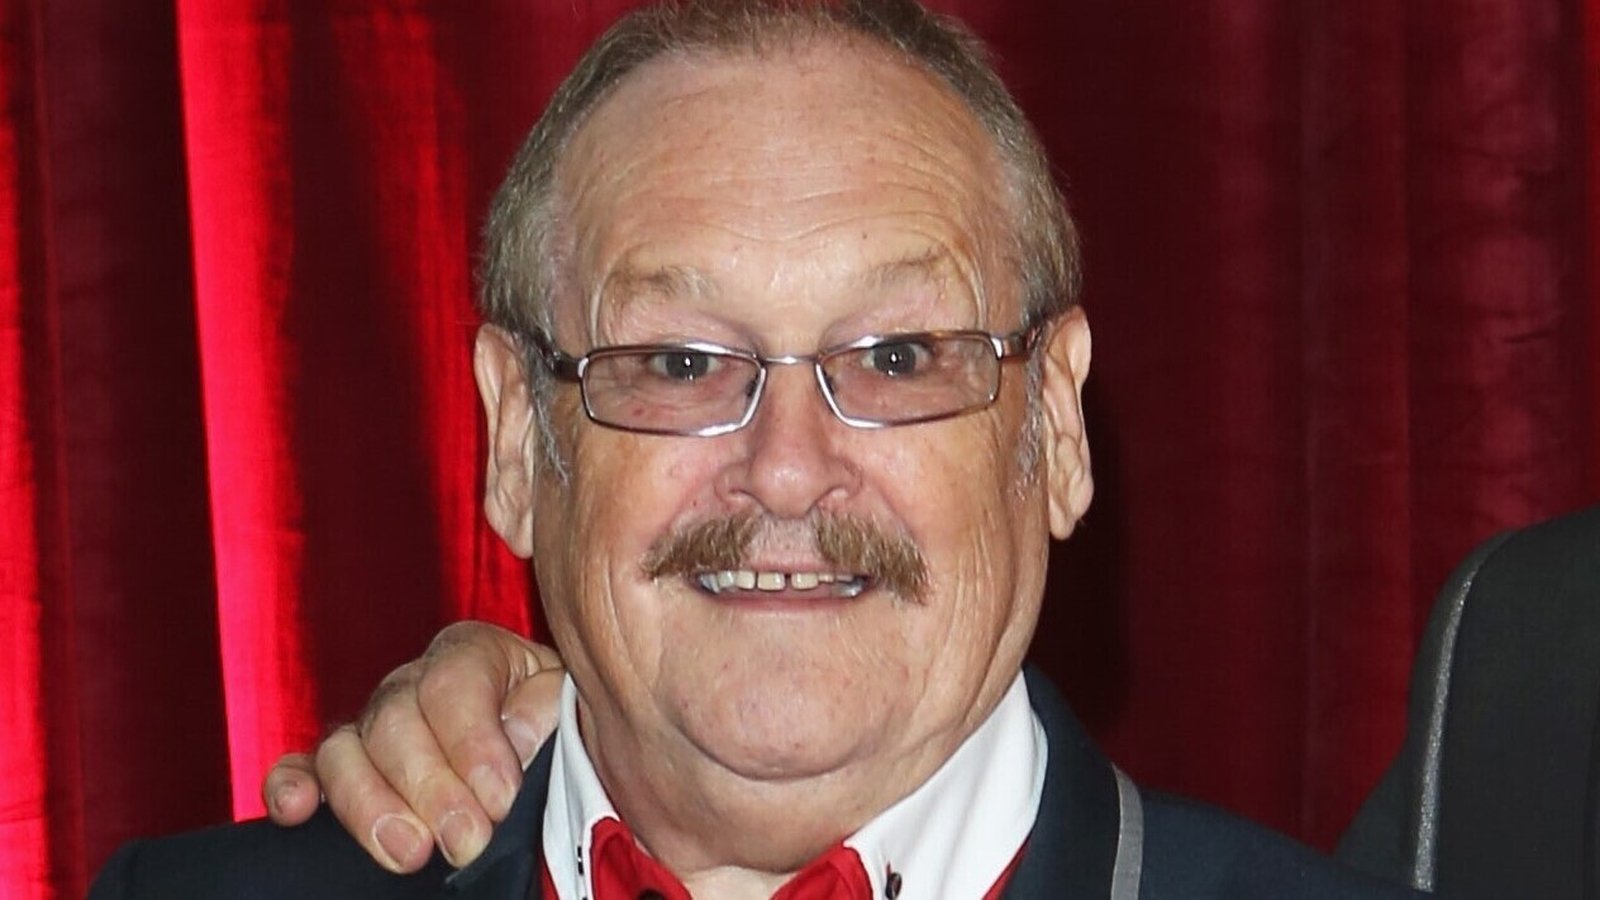 Comic Bobby Ball dies at 76 after being diagnosed with Kovid-19

